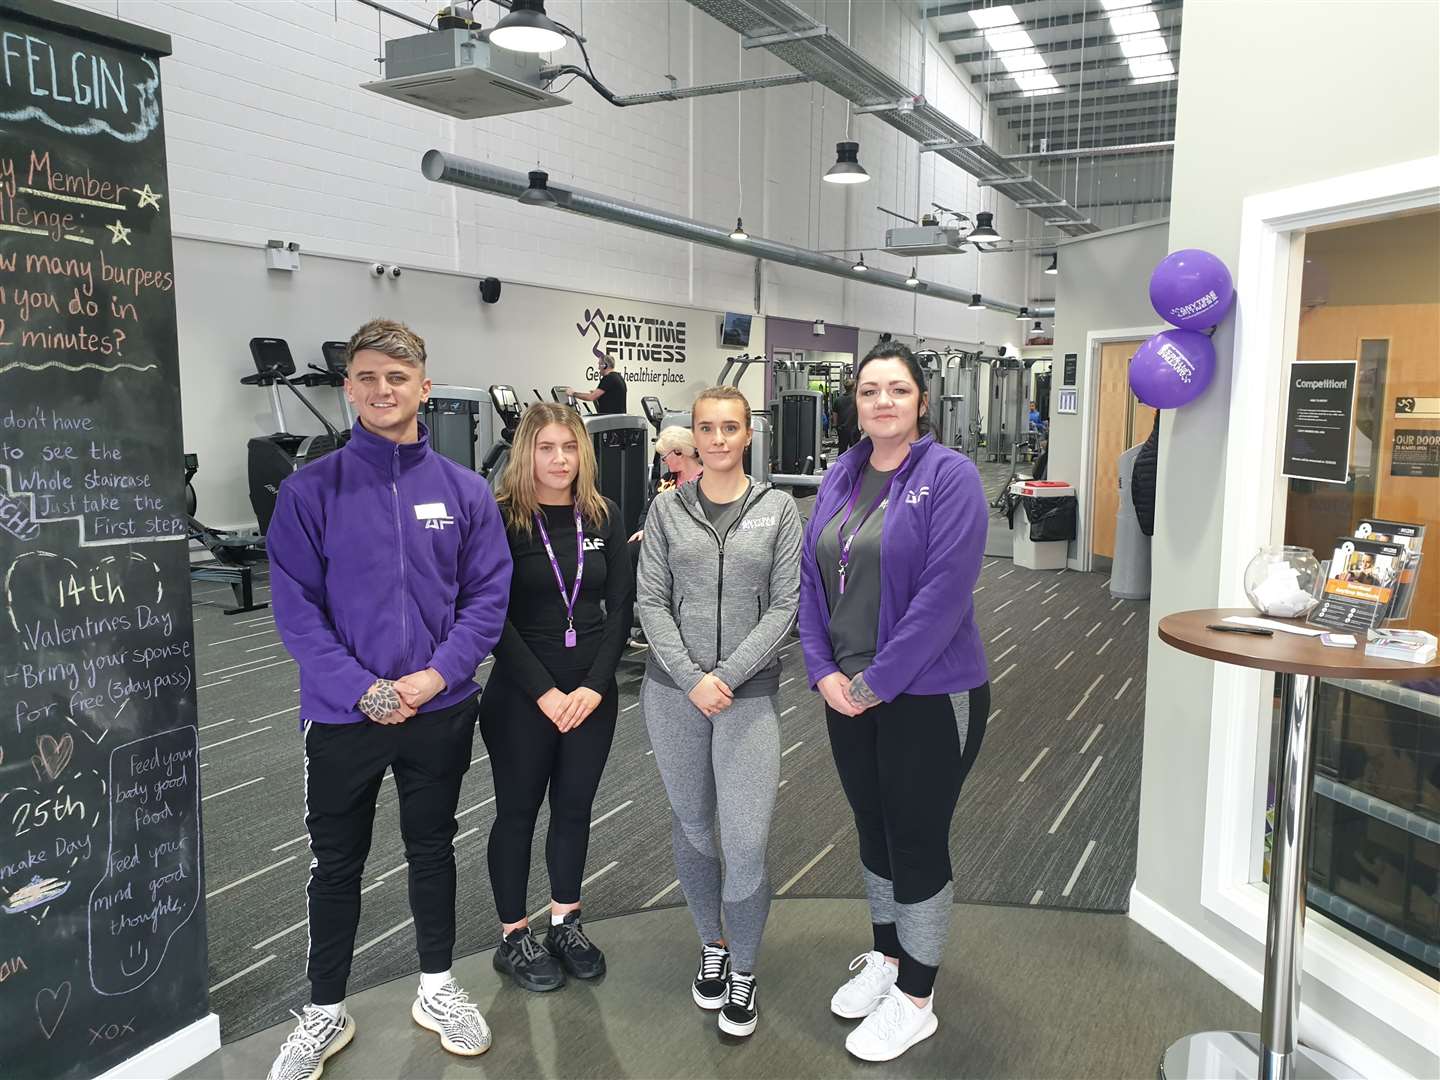 Lisa Clarkson and the Anytime Fitness team in Elgin.